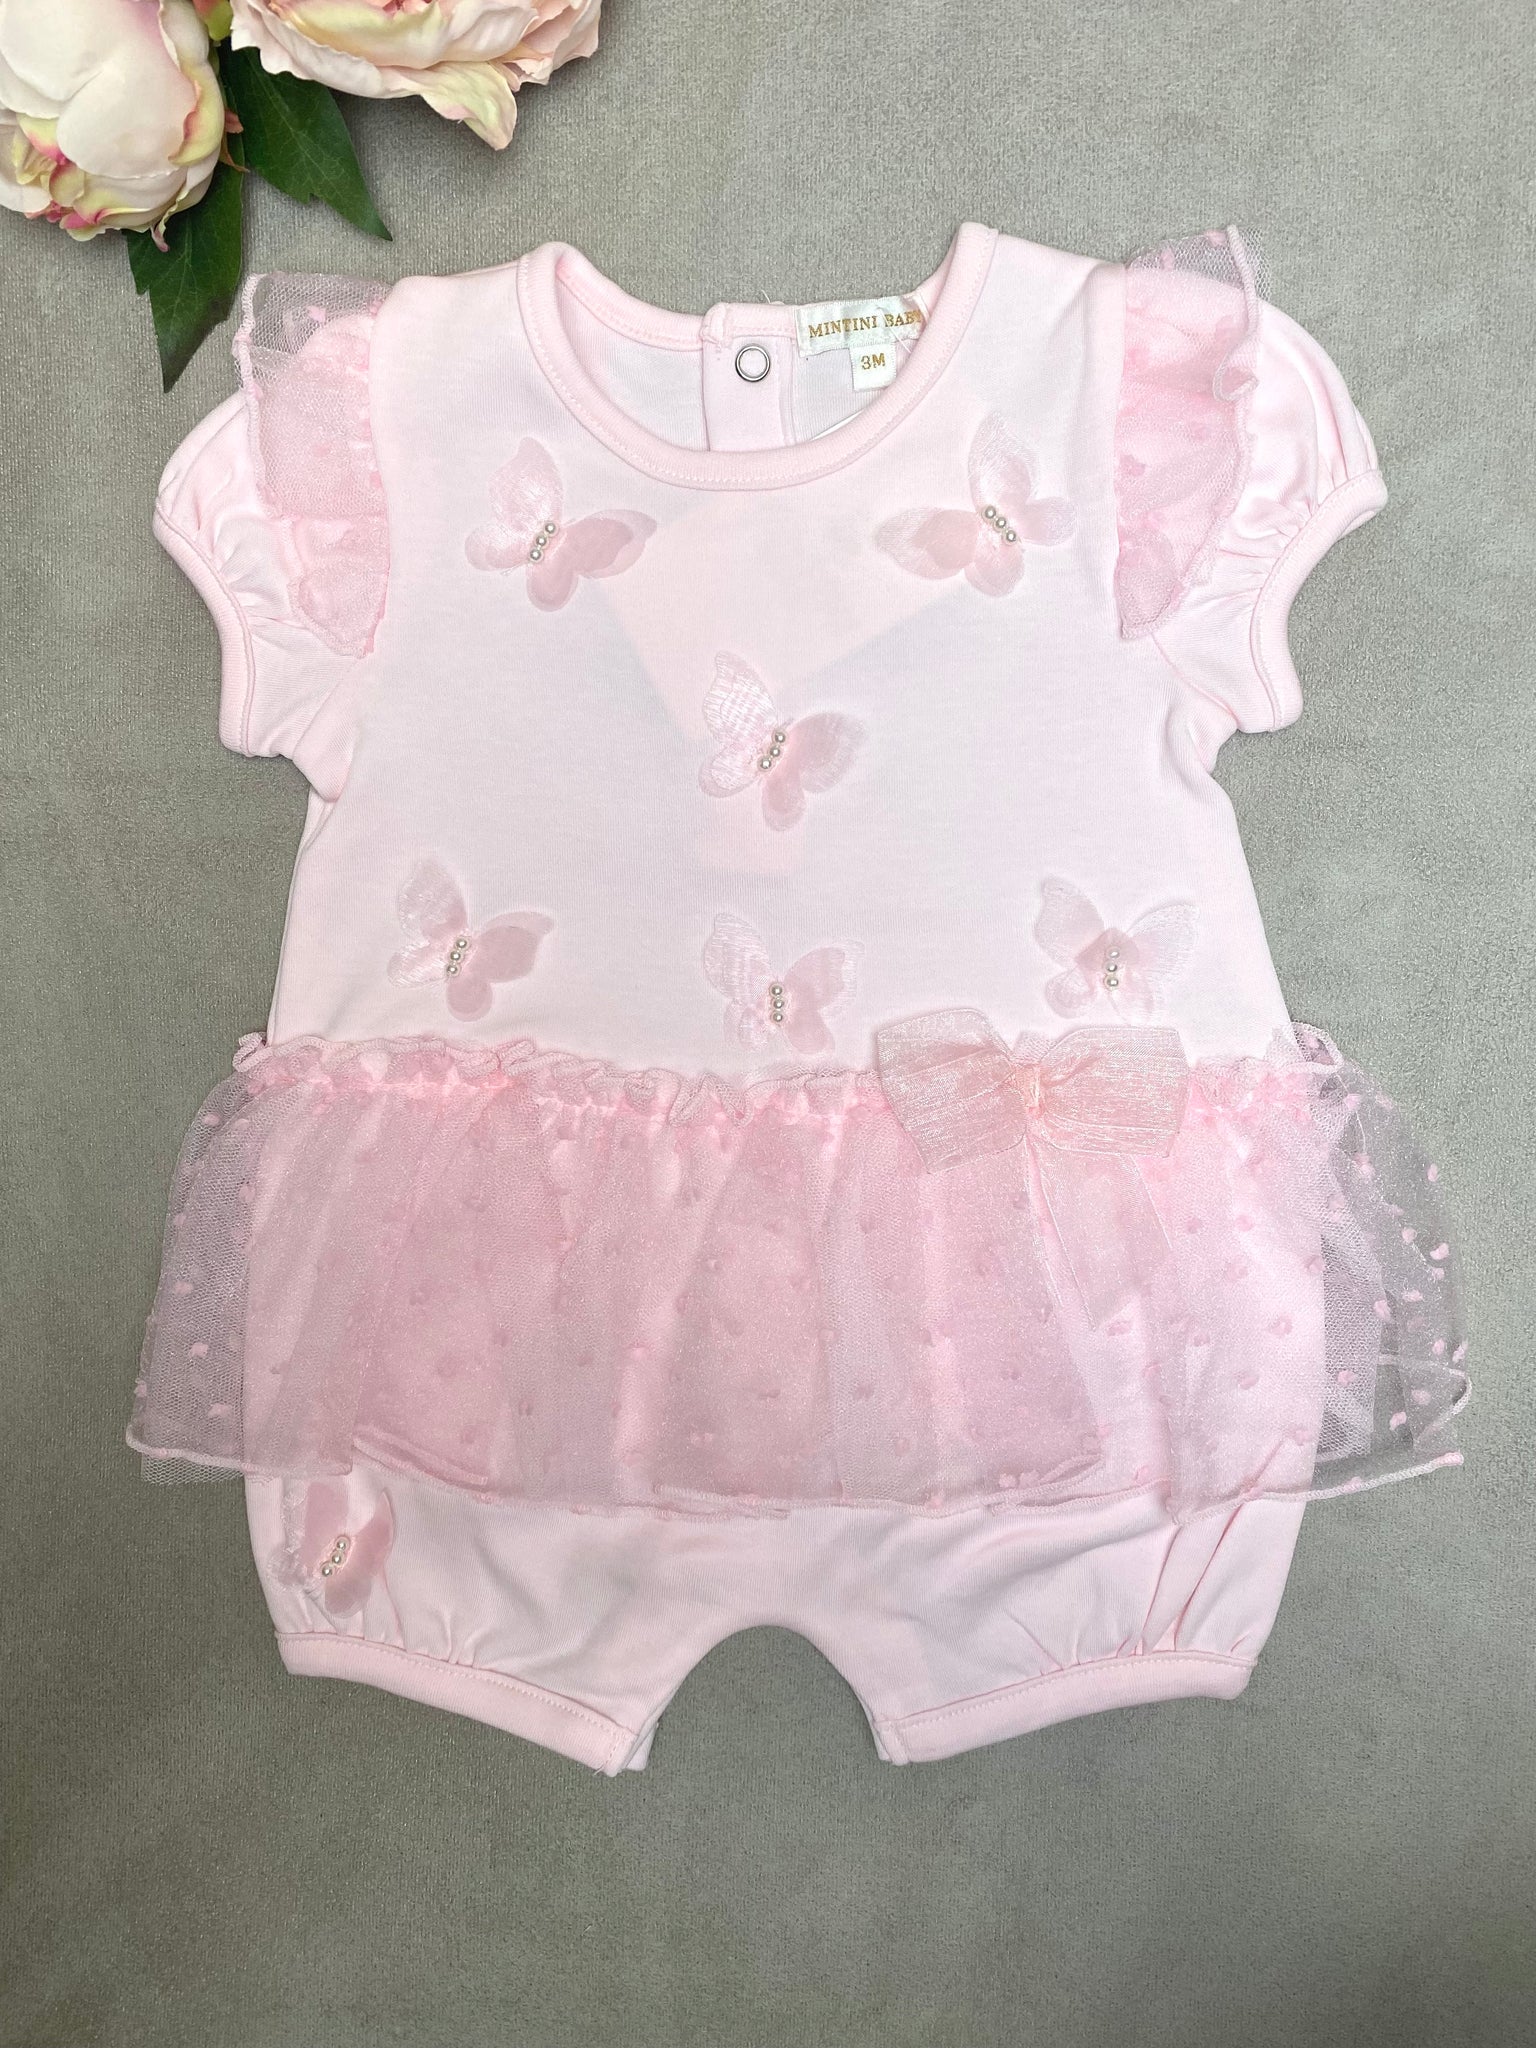 SS22 Mintini Baby Pink Butterfly Romper